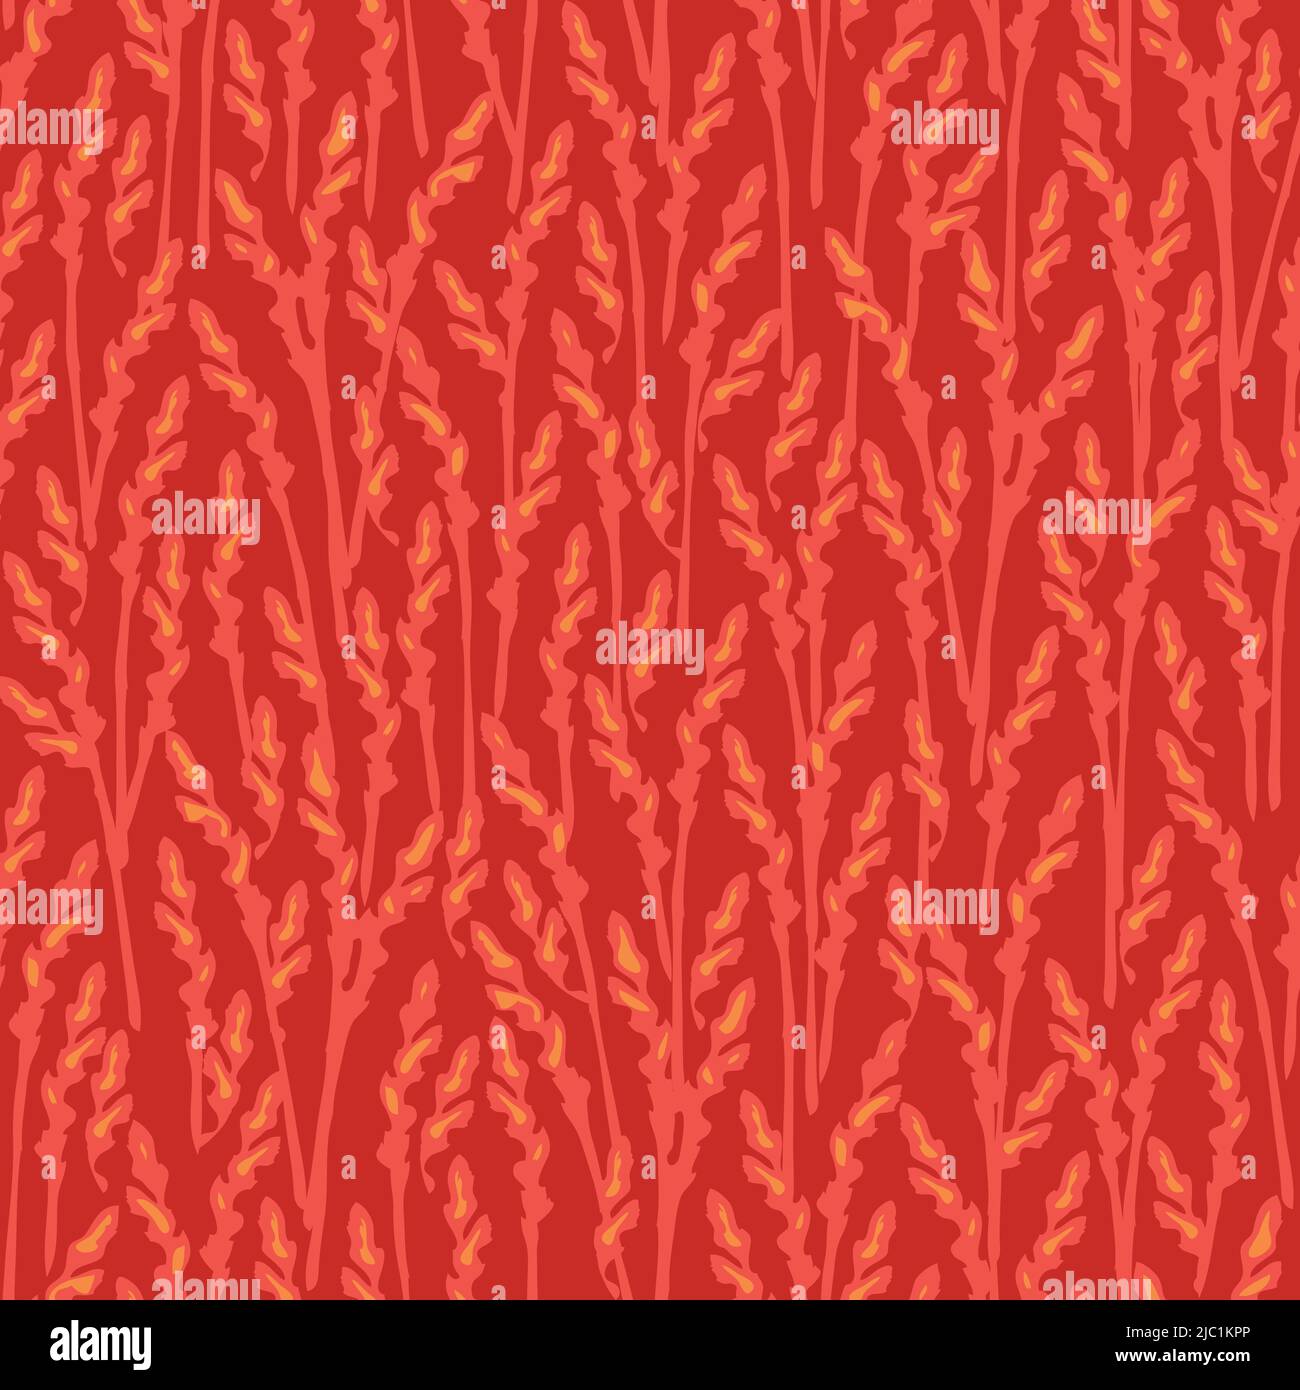 Seamless vector pattern with grass pattern on red background. Artistic rye meadow wallpaper design. Decorative fire fashion textile. Stock Vector